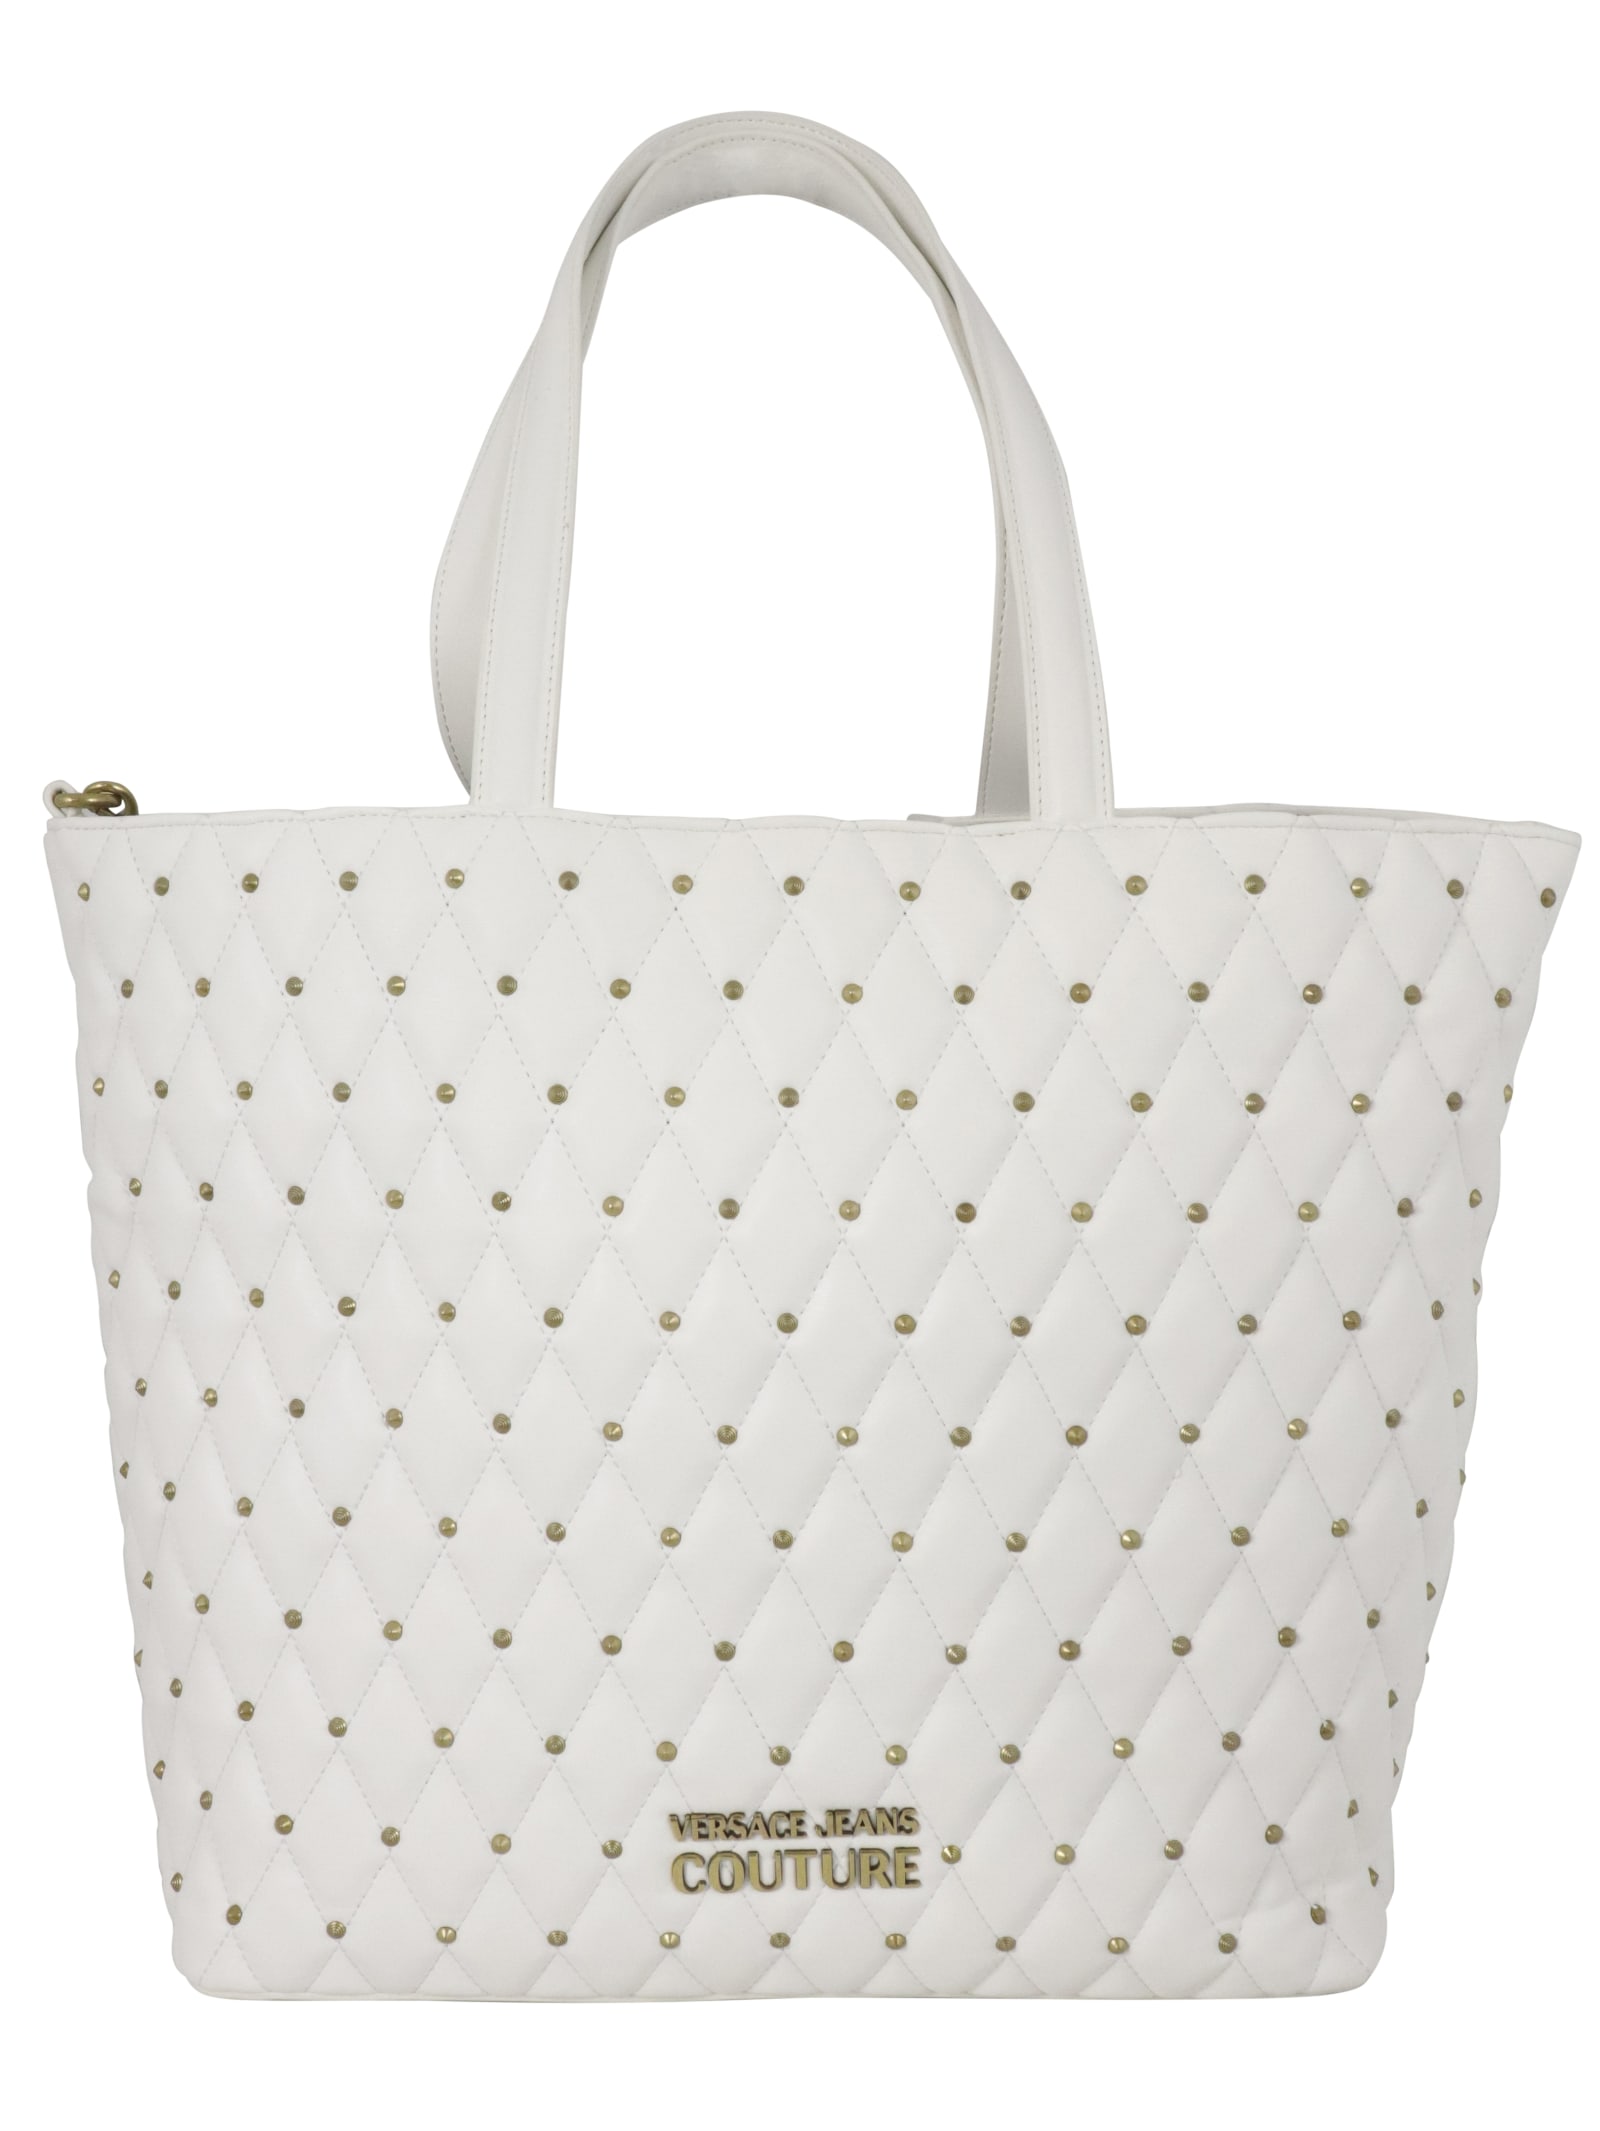 Versace Jeans Couture Quilted Nappa Pu Hobo Bag In White